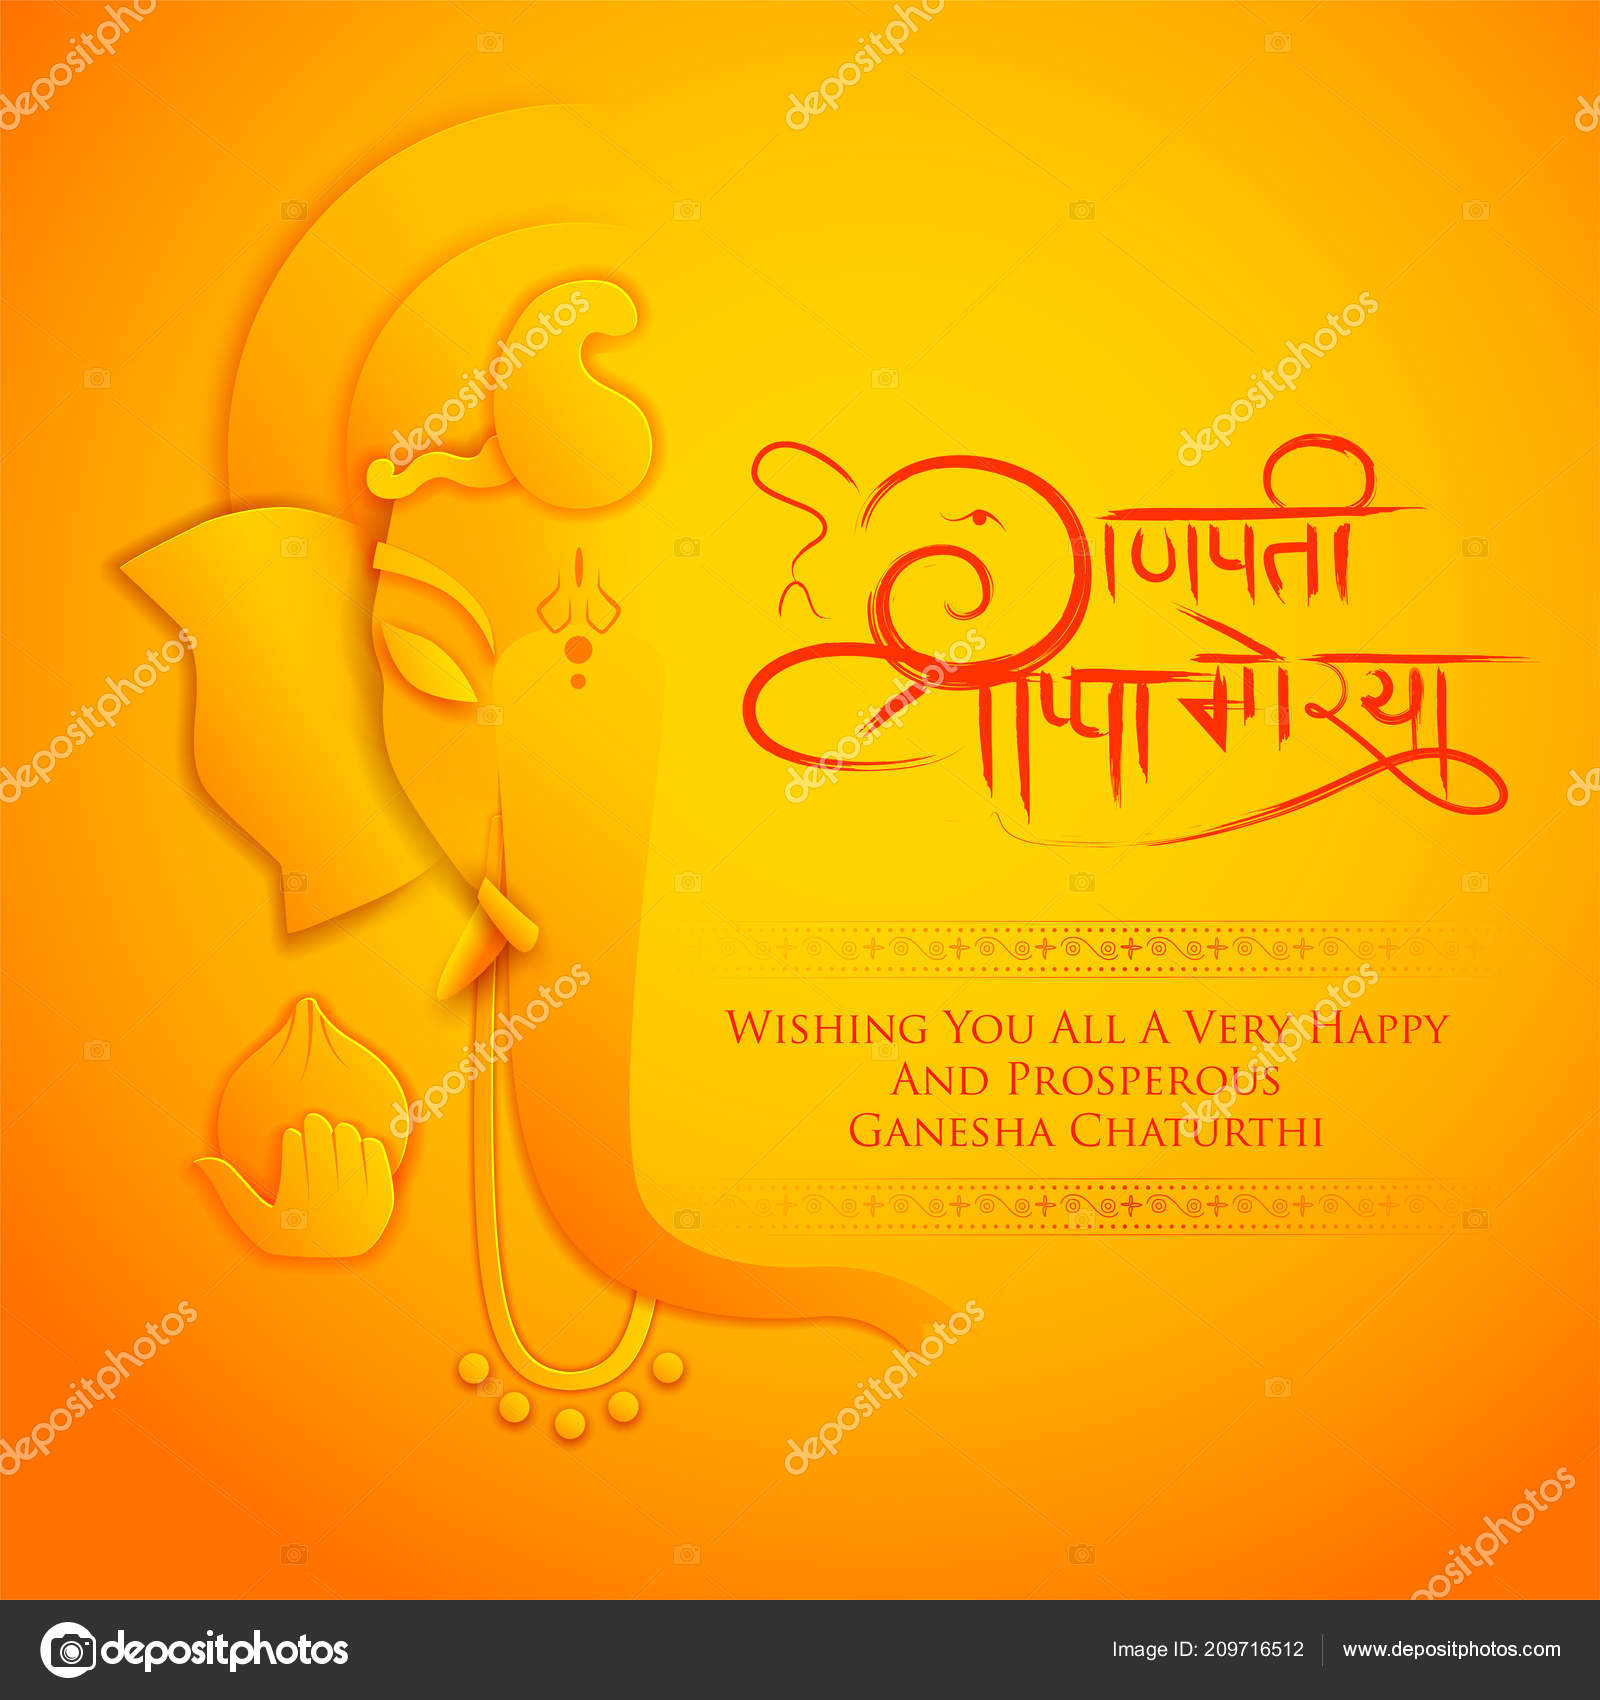 Lord Ganpati background for Ganesh Chaturthi festival of India with ...